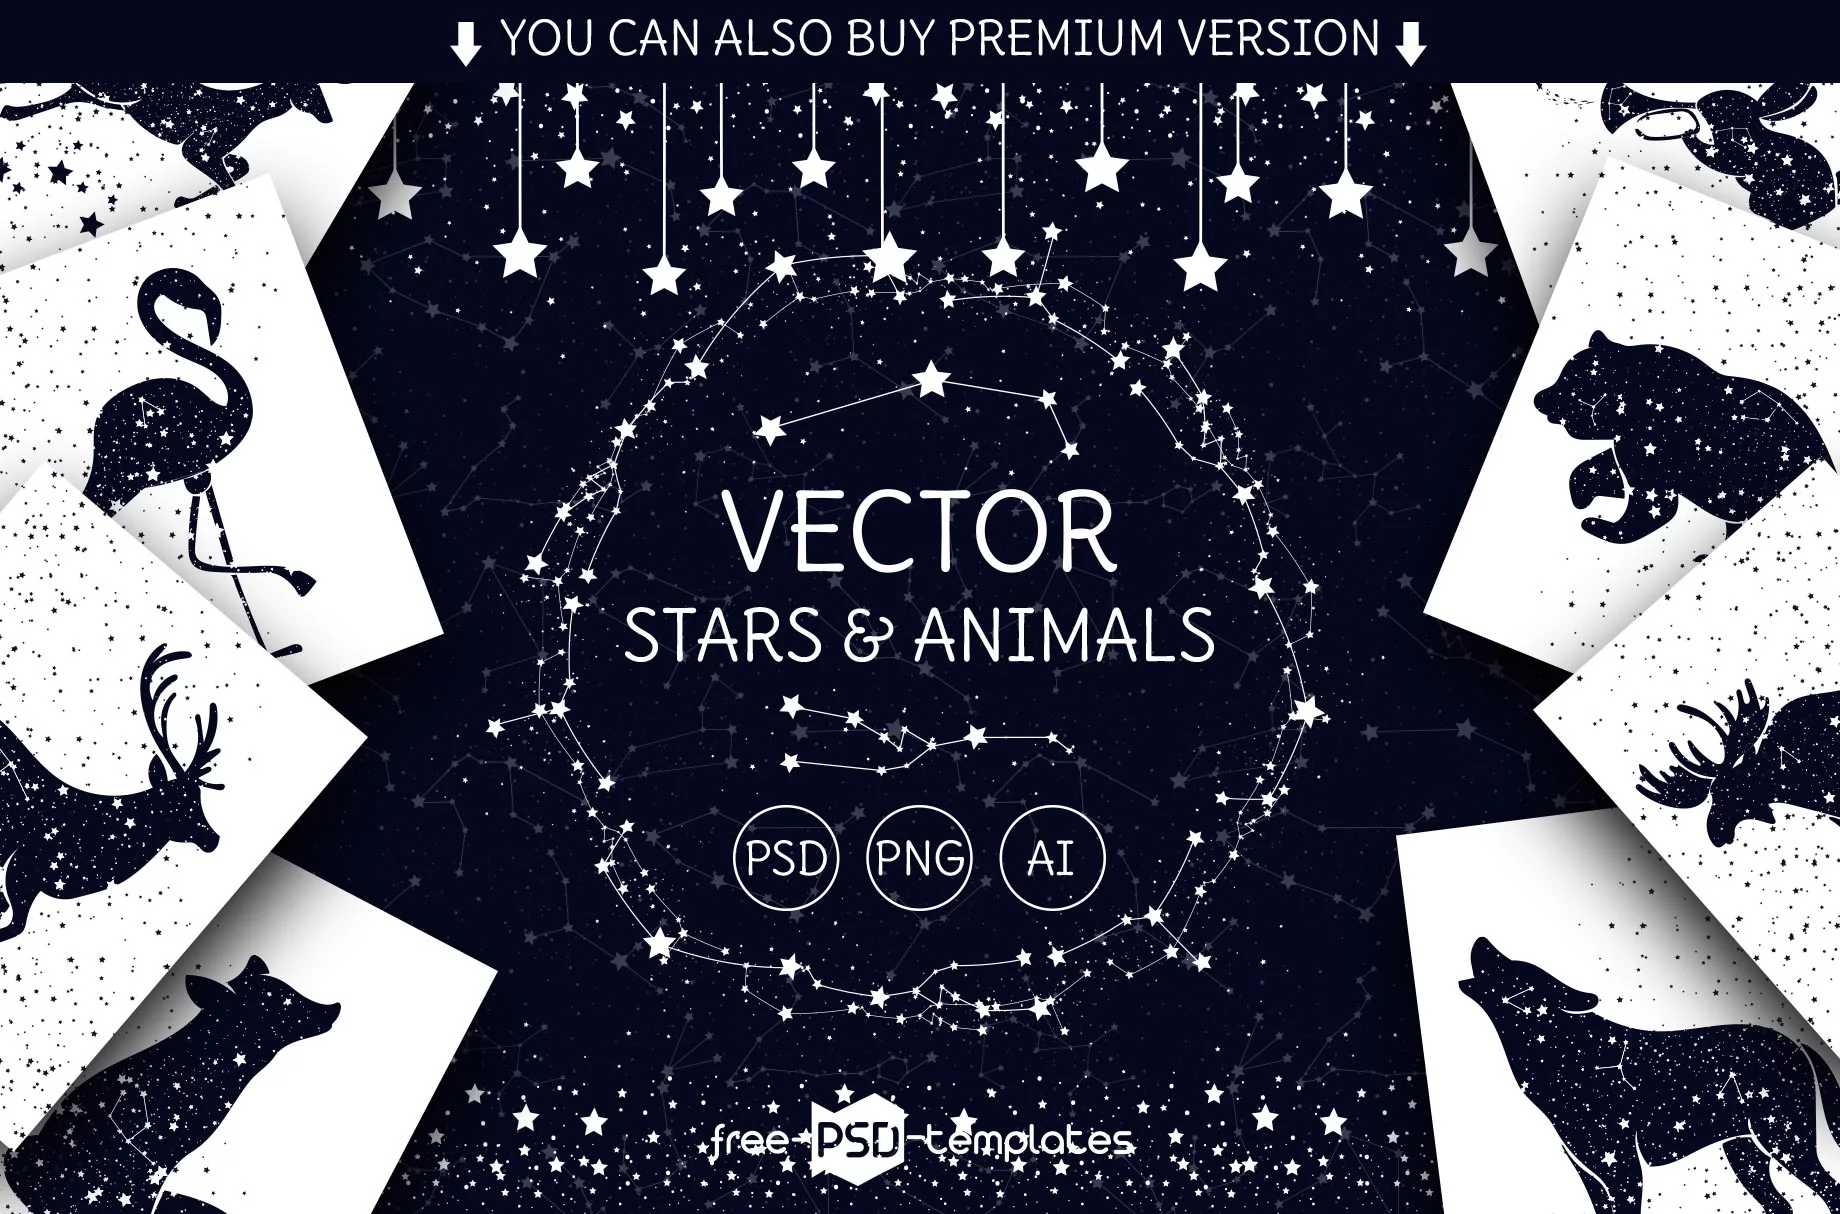 Free Star and Animals – vector illustrations